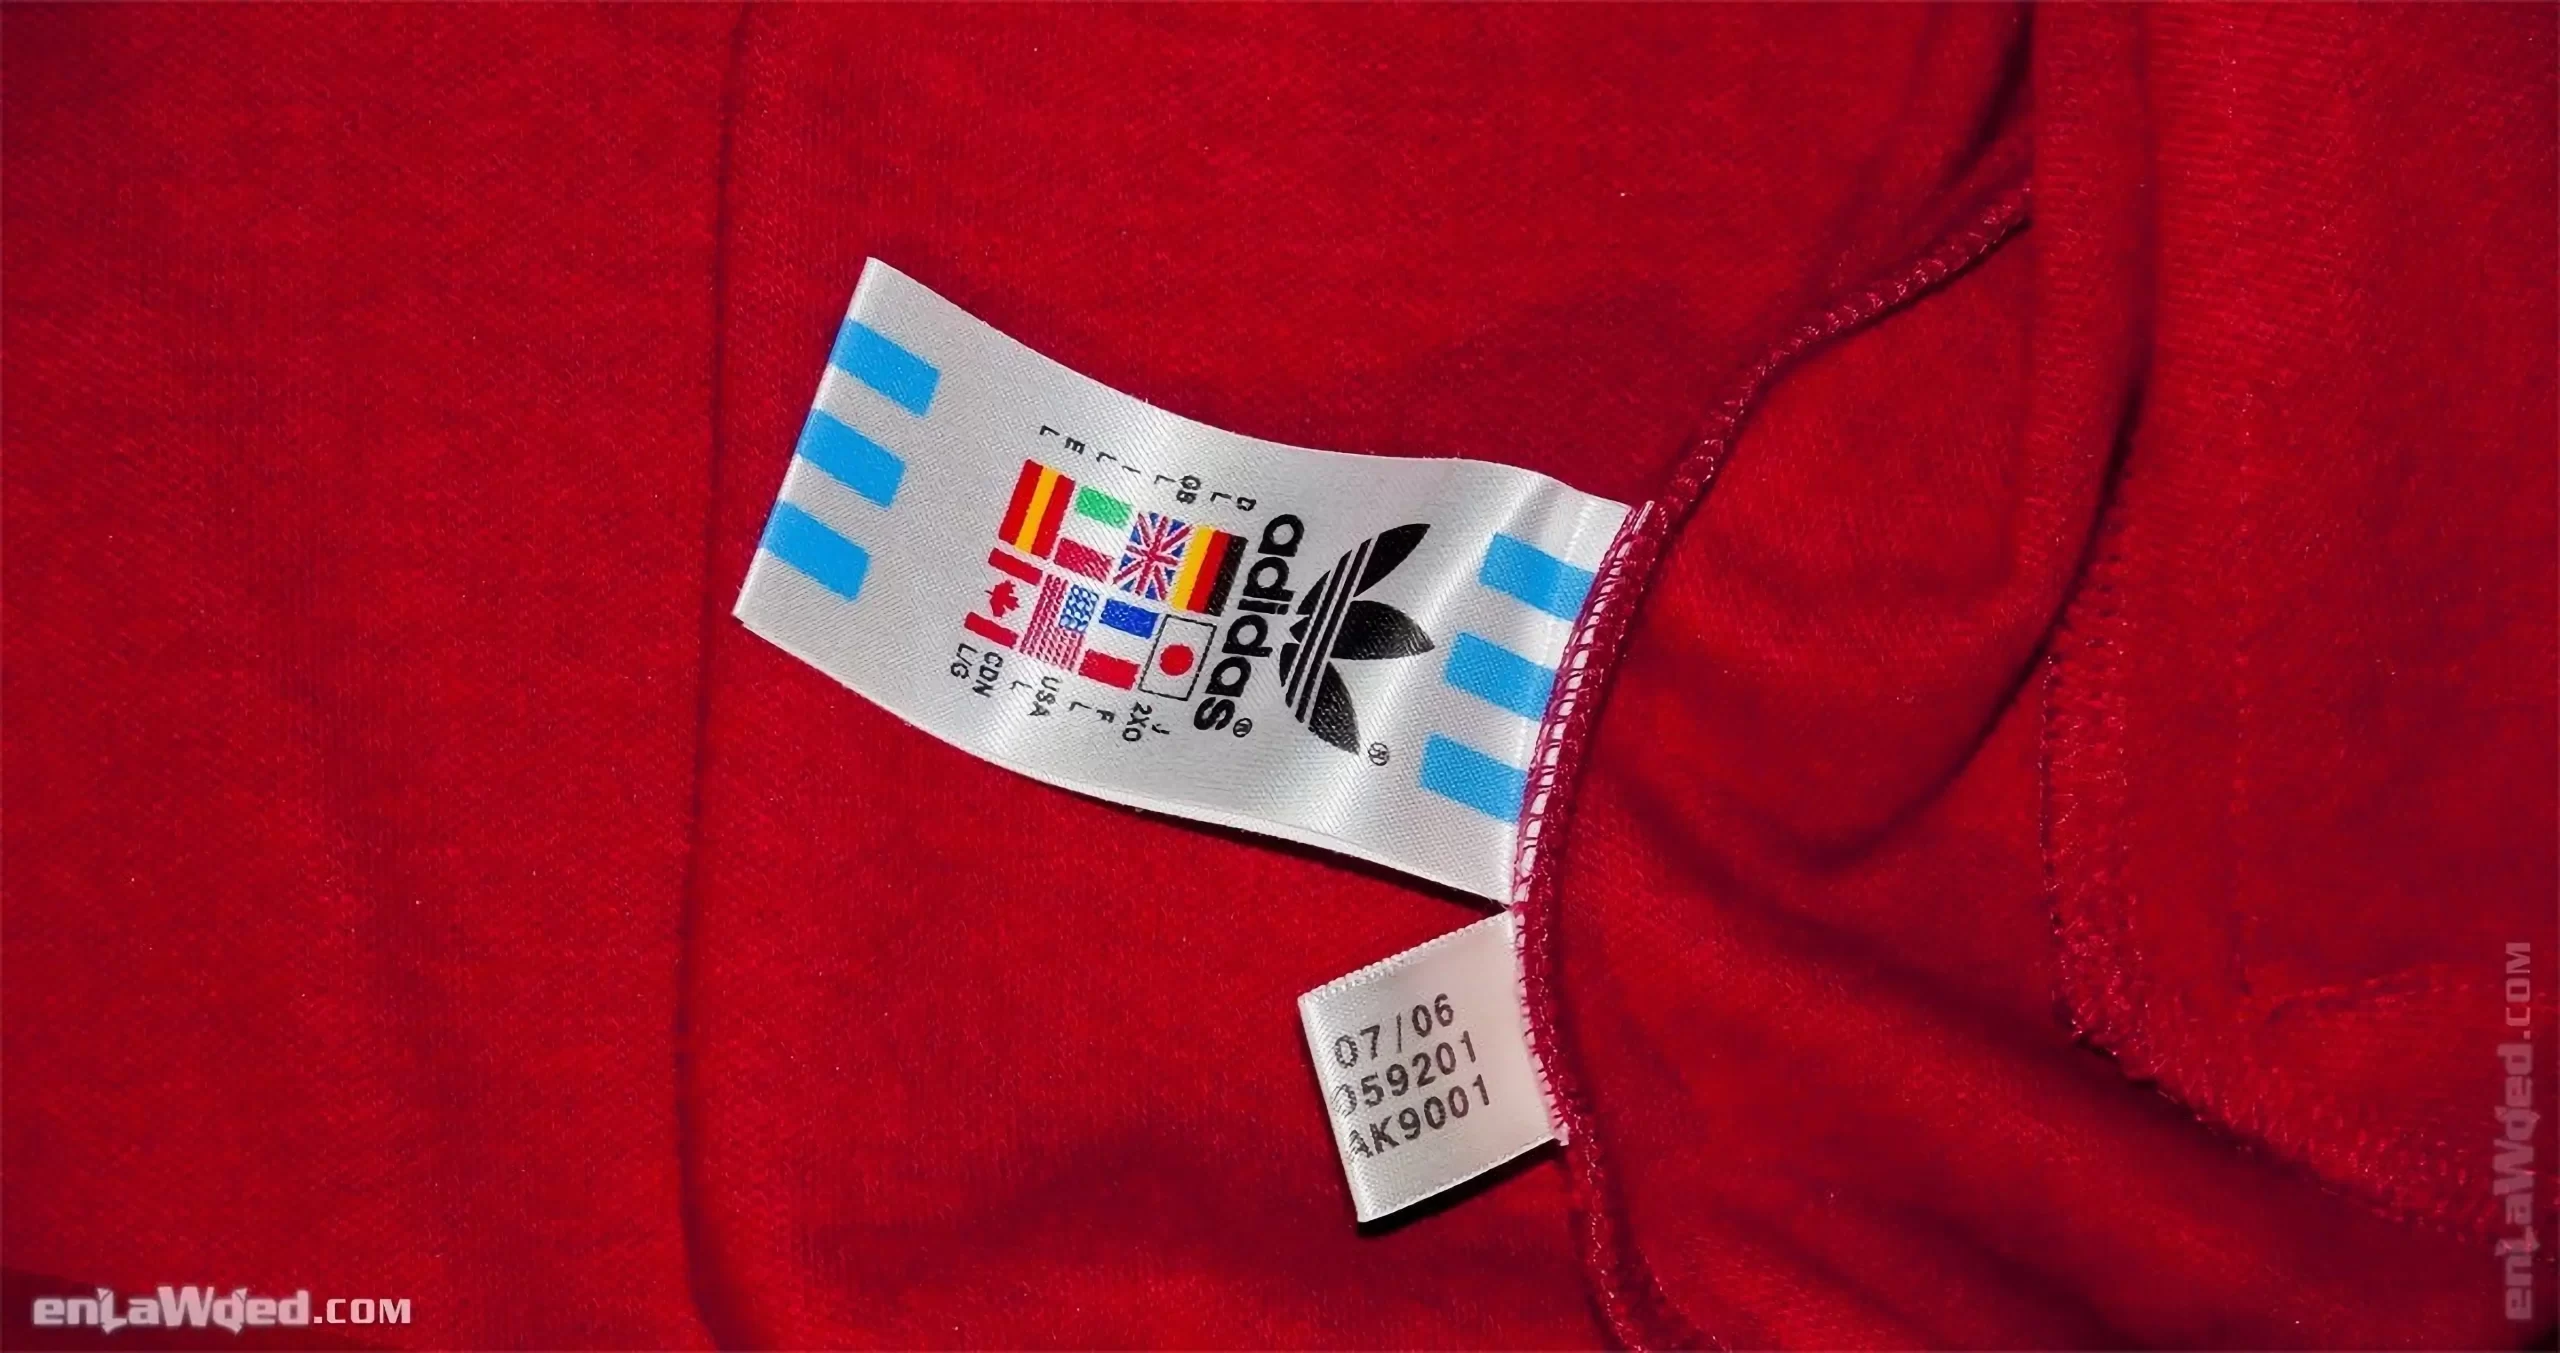 Adidas tag of the Barcelona jacket, with the month and year of fabrication: 07/2006